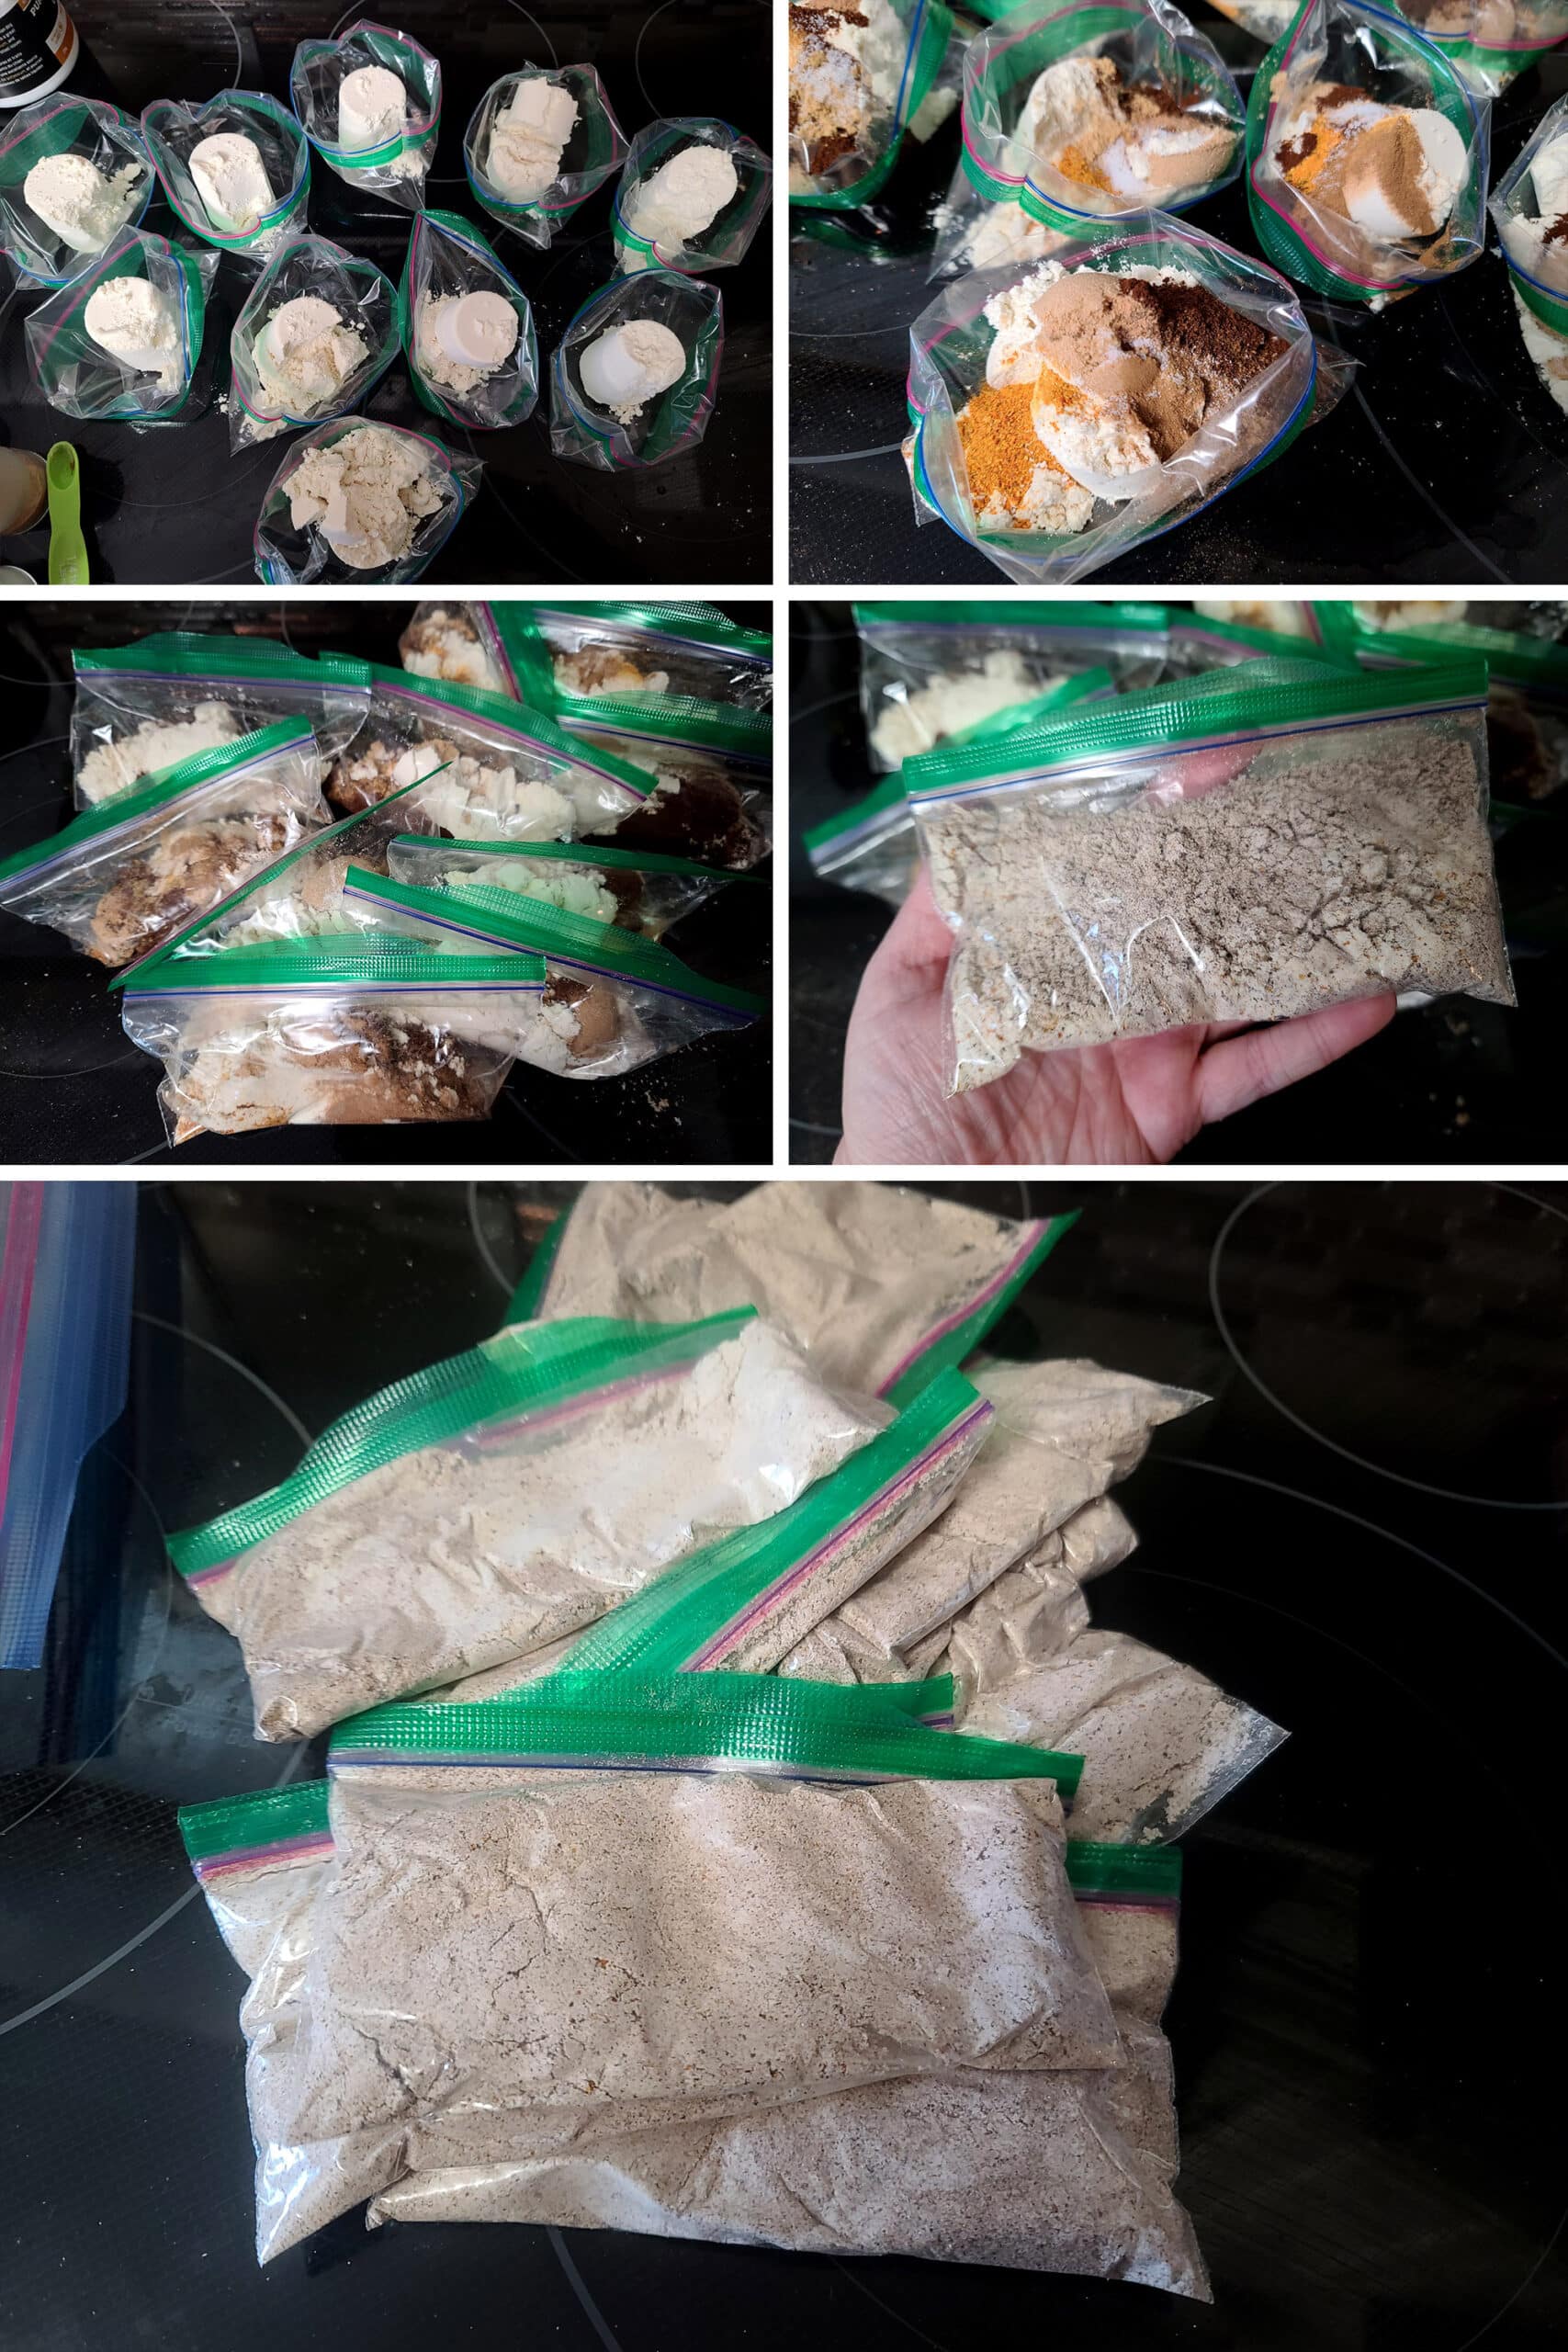 5 part image showing high protein keto pumpkin spice latte mix ingredients being measured into baggies, mixed, and sealed.